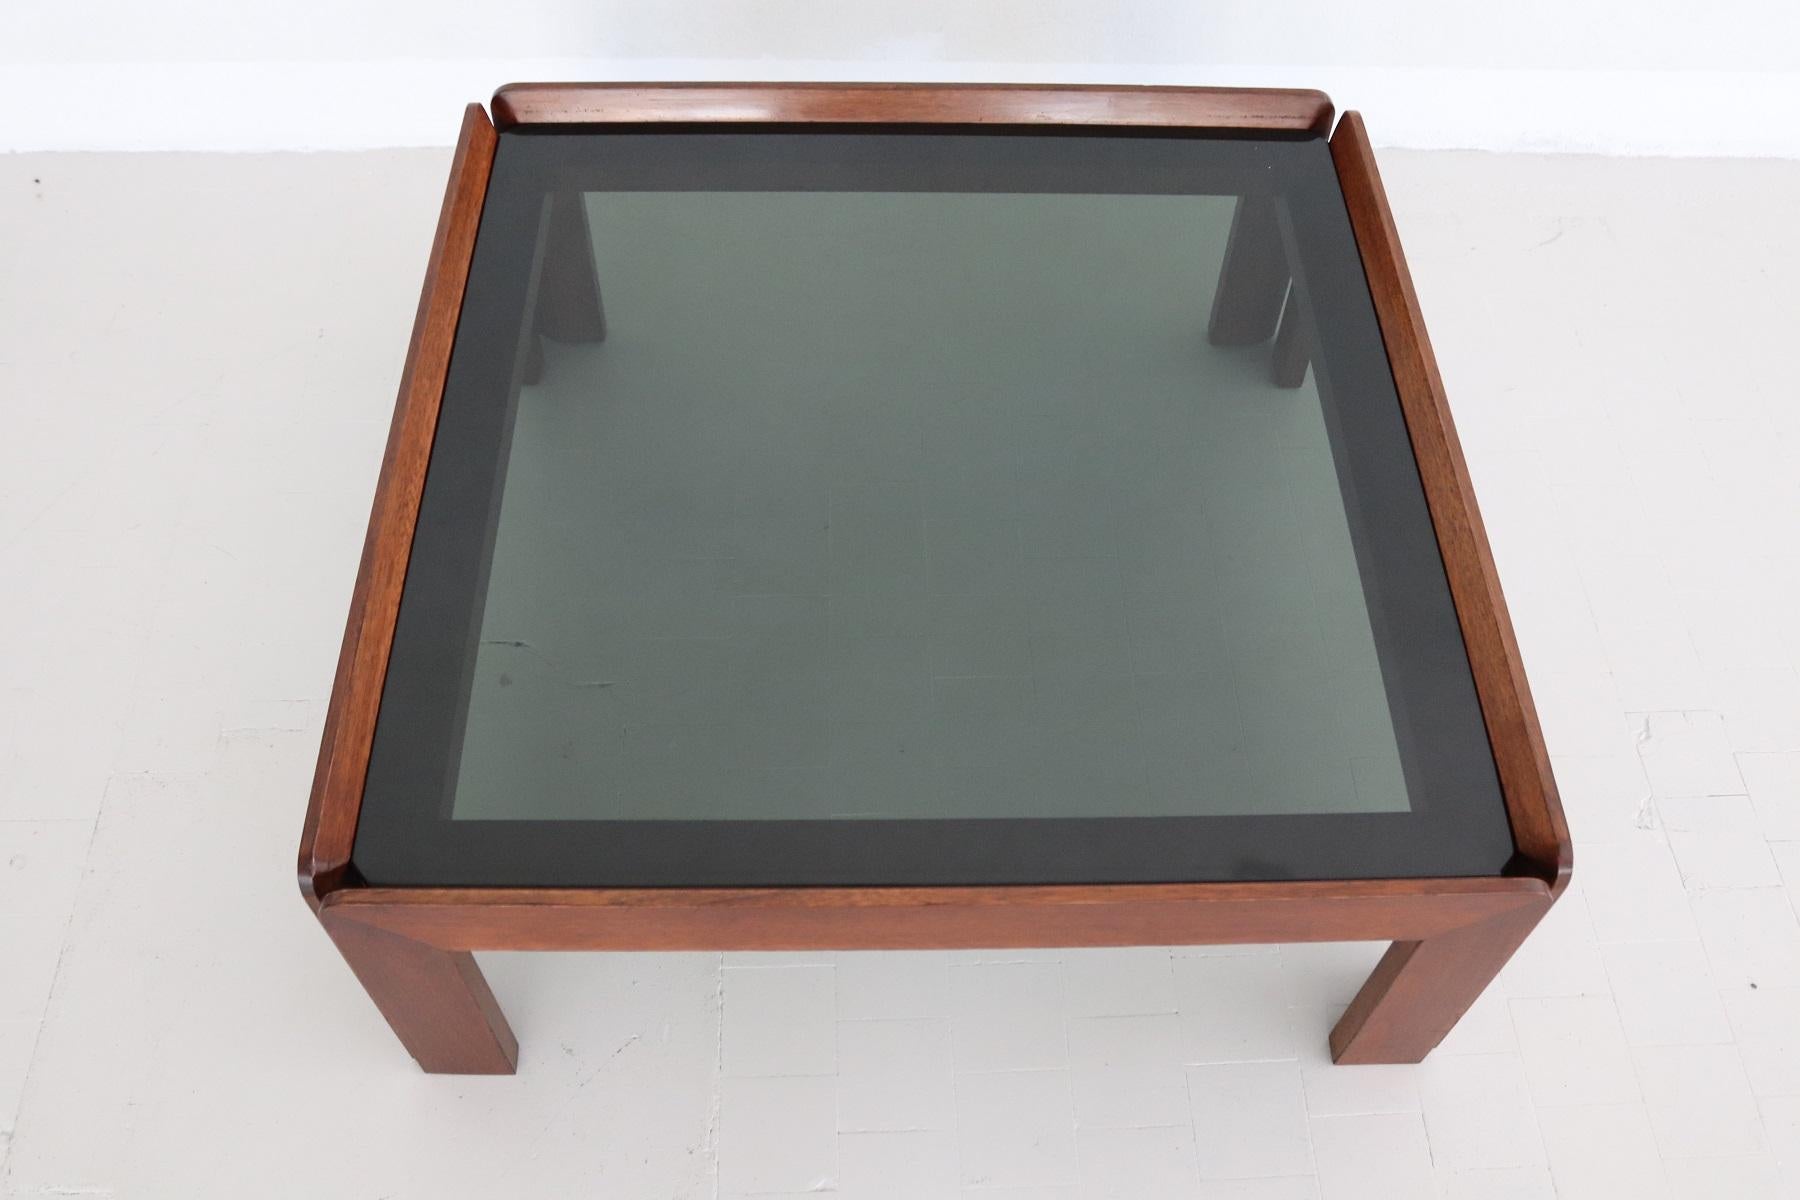 Italian Midcentury Square Coffee Table in Beechwood and Smoked Glass, 1960s For Sale 10